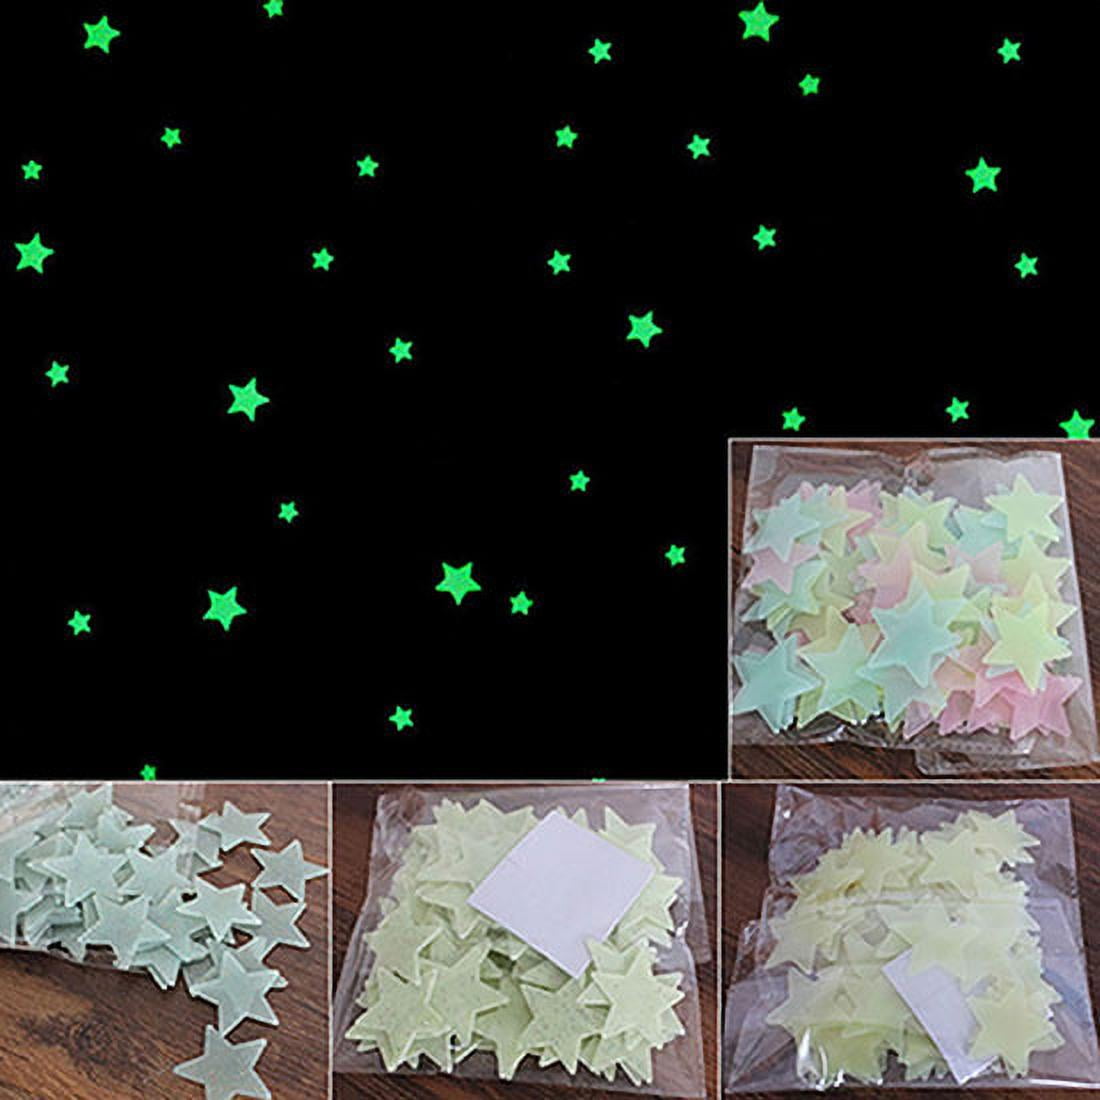 Details about   100pcs/set Home DIY Wall Ceiling Star Moon Stickers Fluorescent Glow In The Dark 